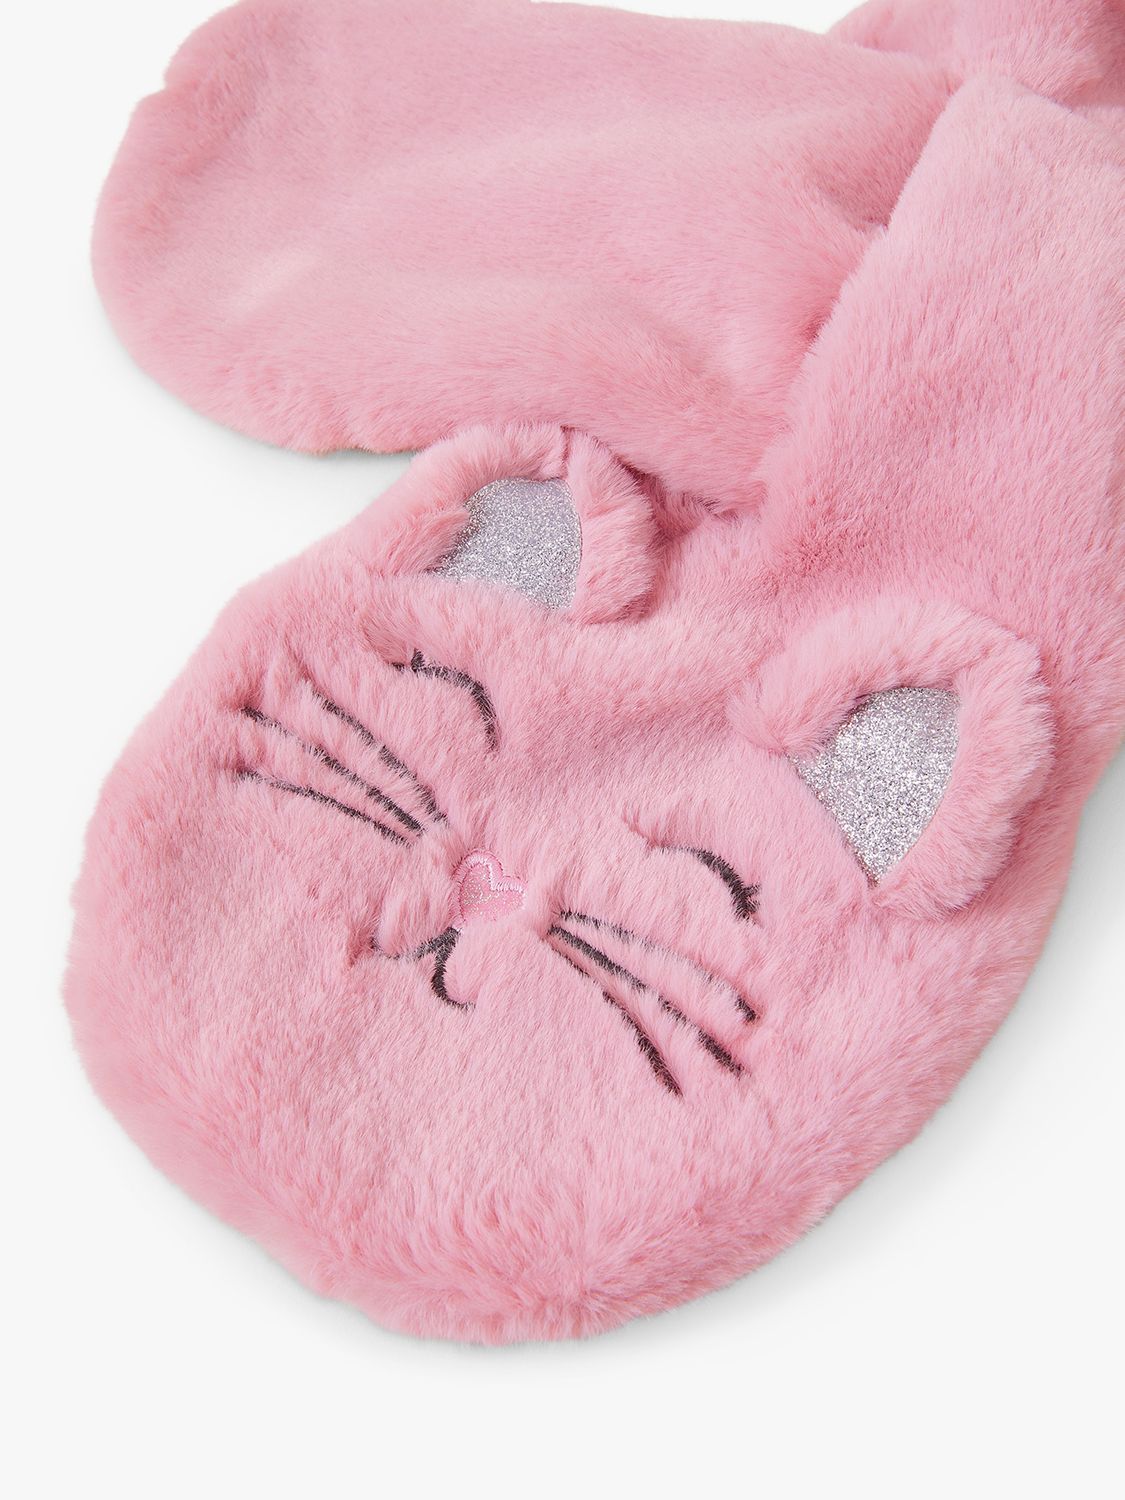 Angels by Accessorize Kids' Fluffy Cat Scarf, Pink, One Size